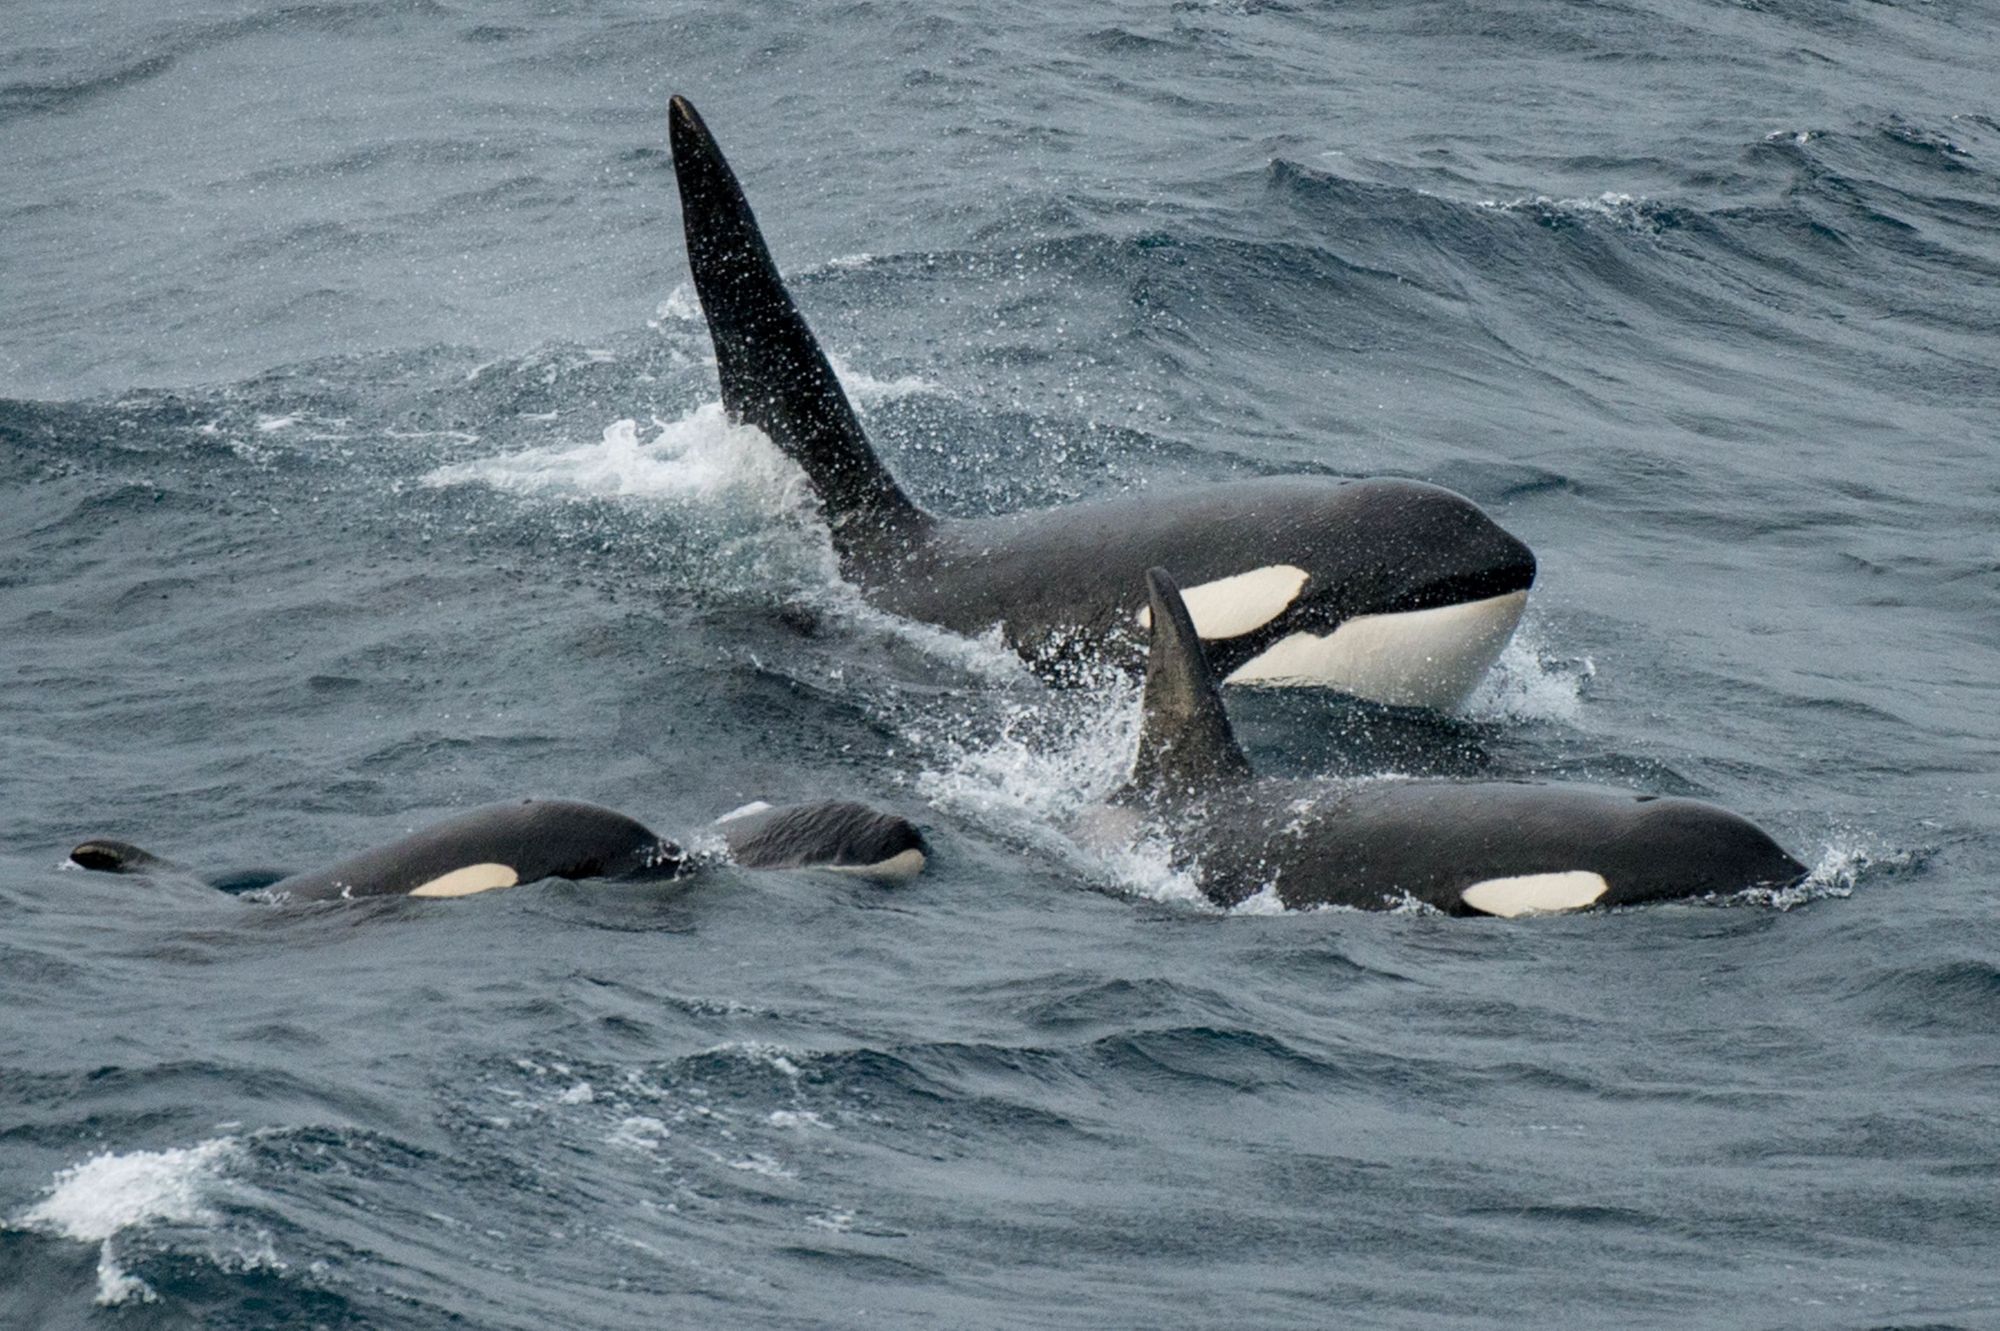 Orca whales surfacing together, in Shetland. In Spring, they visit the Shetlands to hunt for seals. Credit:BBC/Silverback Films/SCOTLAND: The Big Picture/naturepl.com